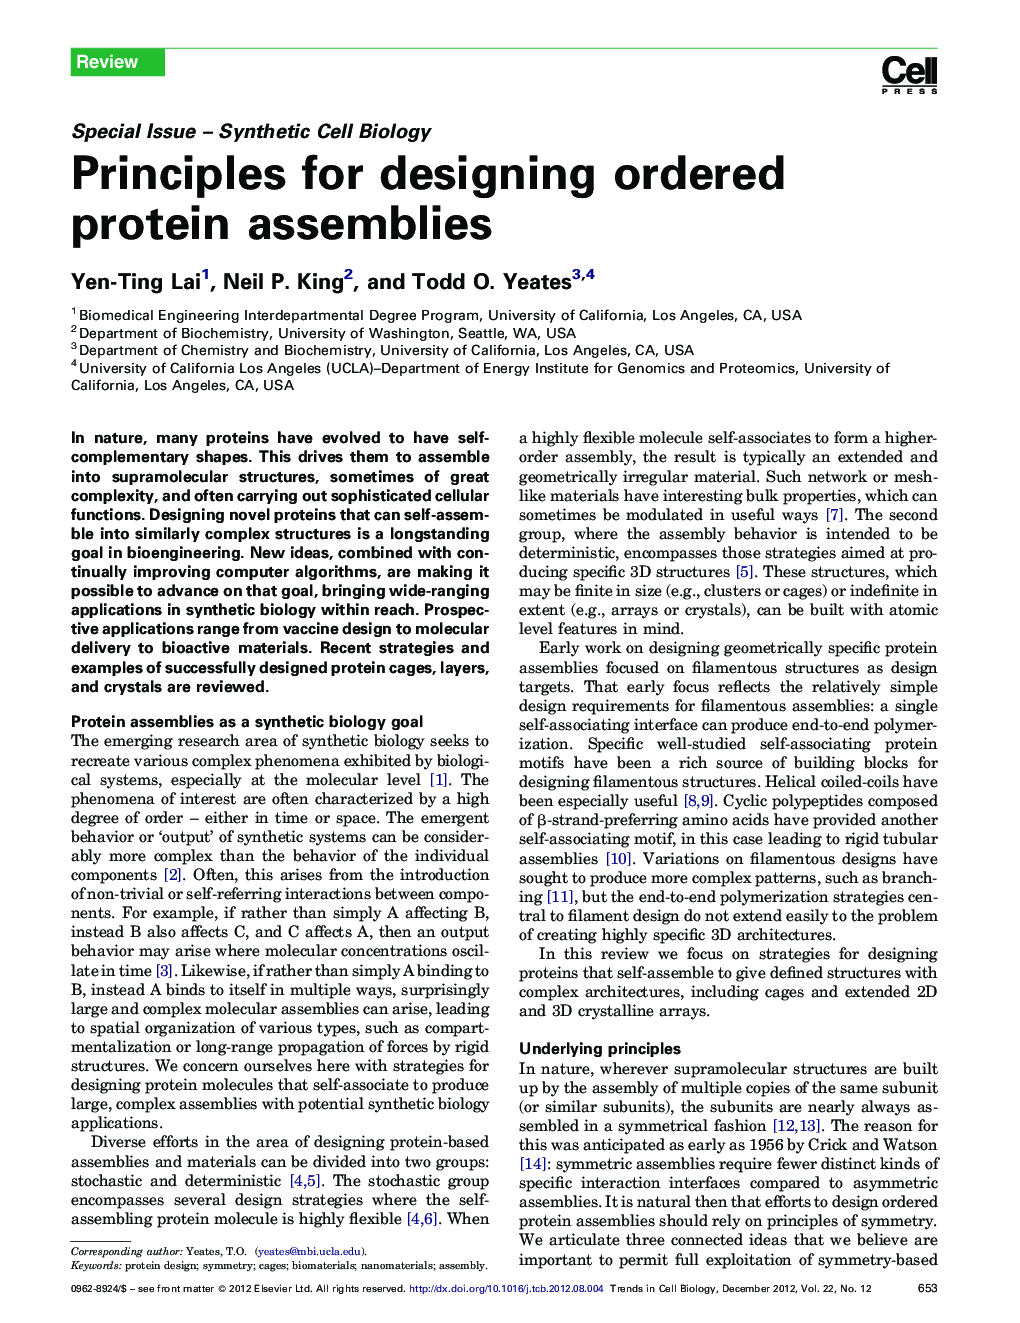 Principles for designing ordered protein assemblies